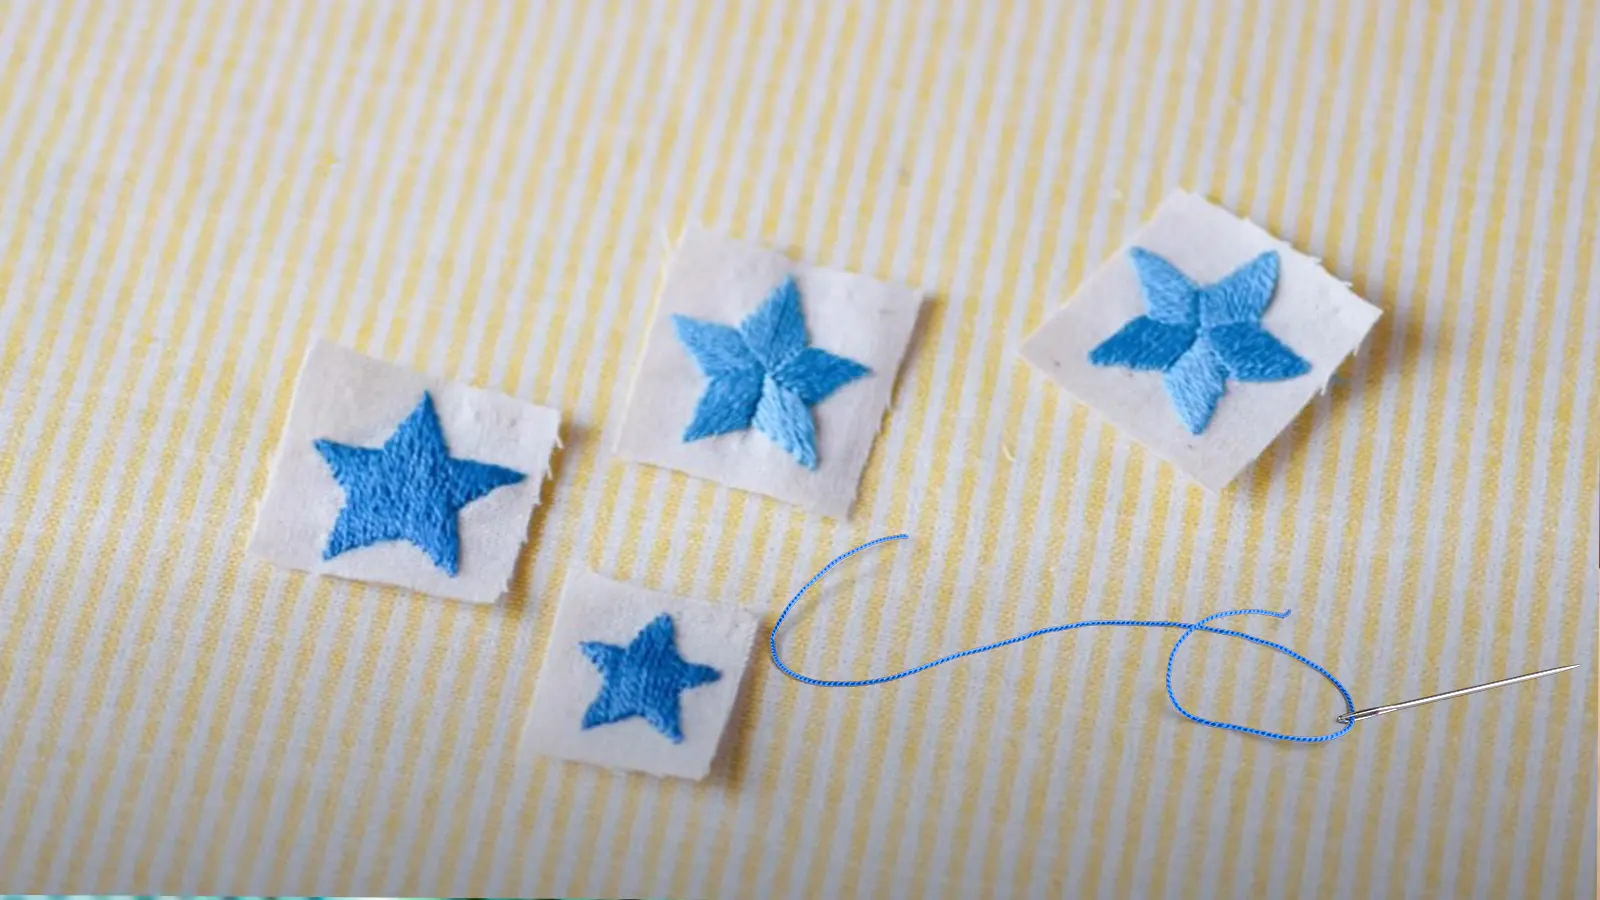 How to Embroider a Star: Star Stitch Embroidery Tutorial